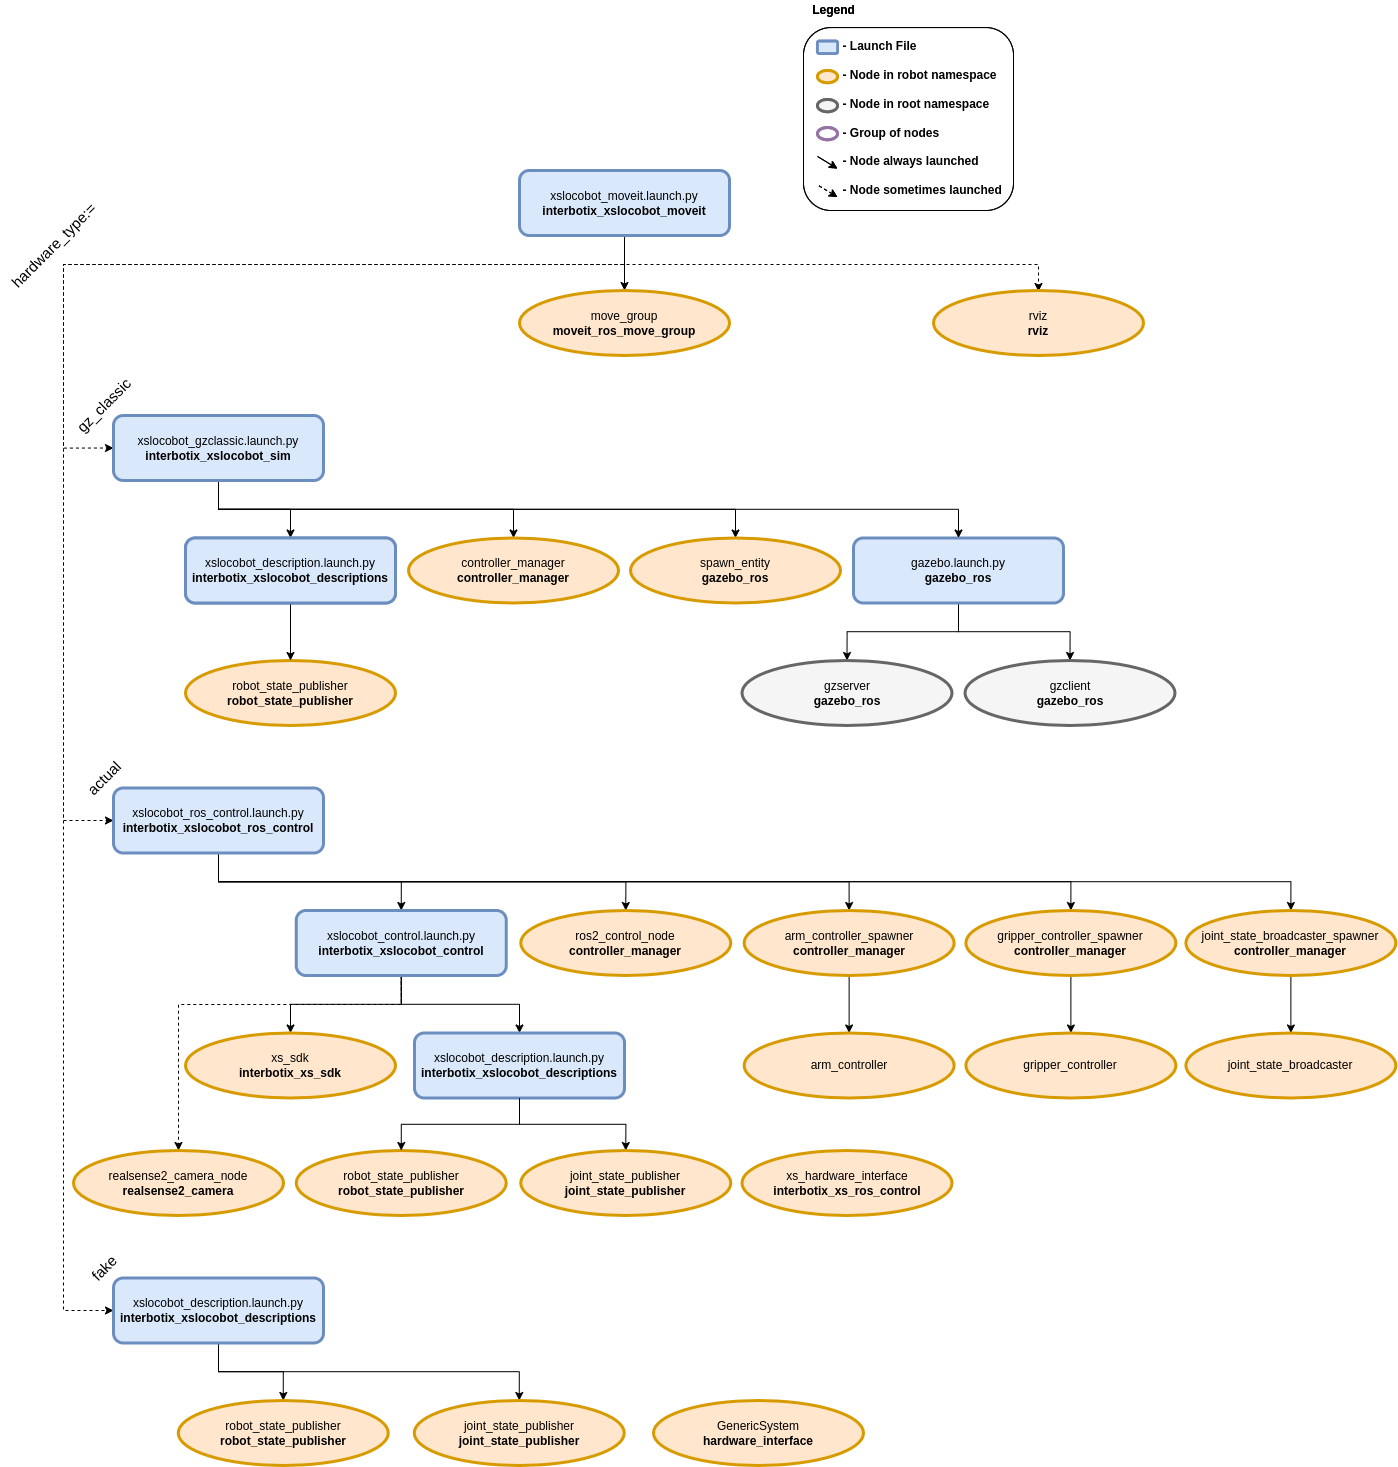 ../_images/xslocobot_moveit_flowchart_ros2.png